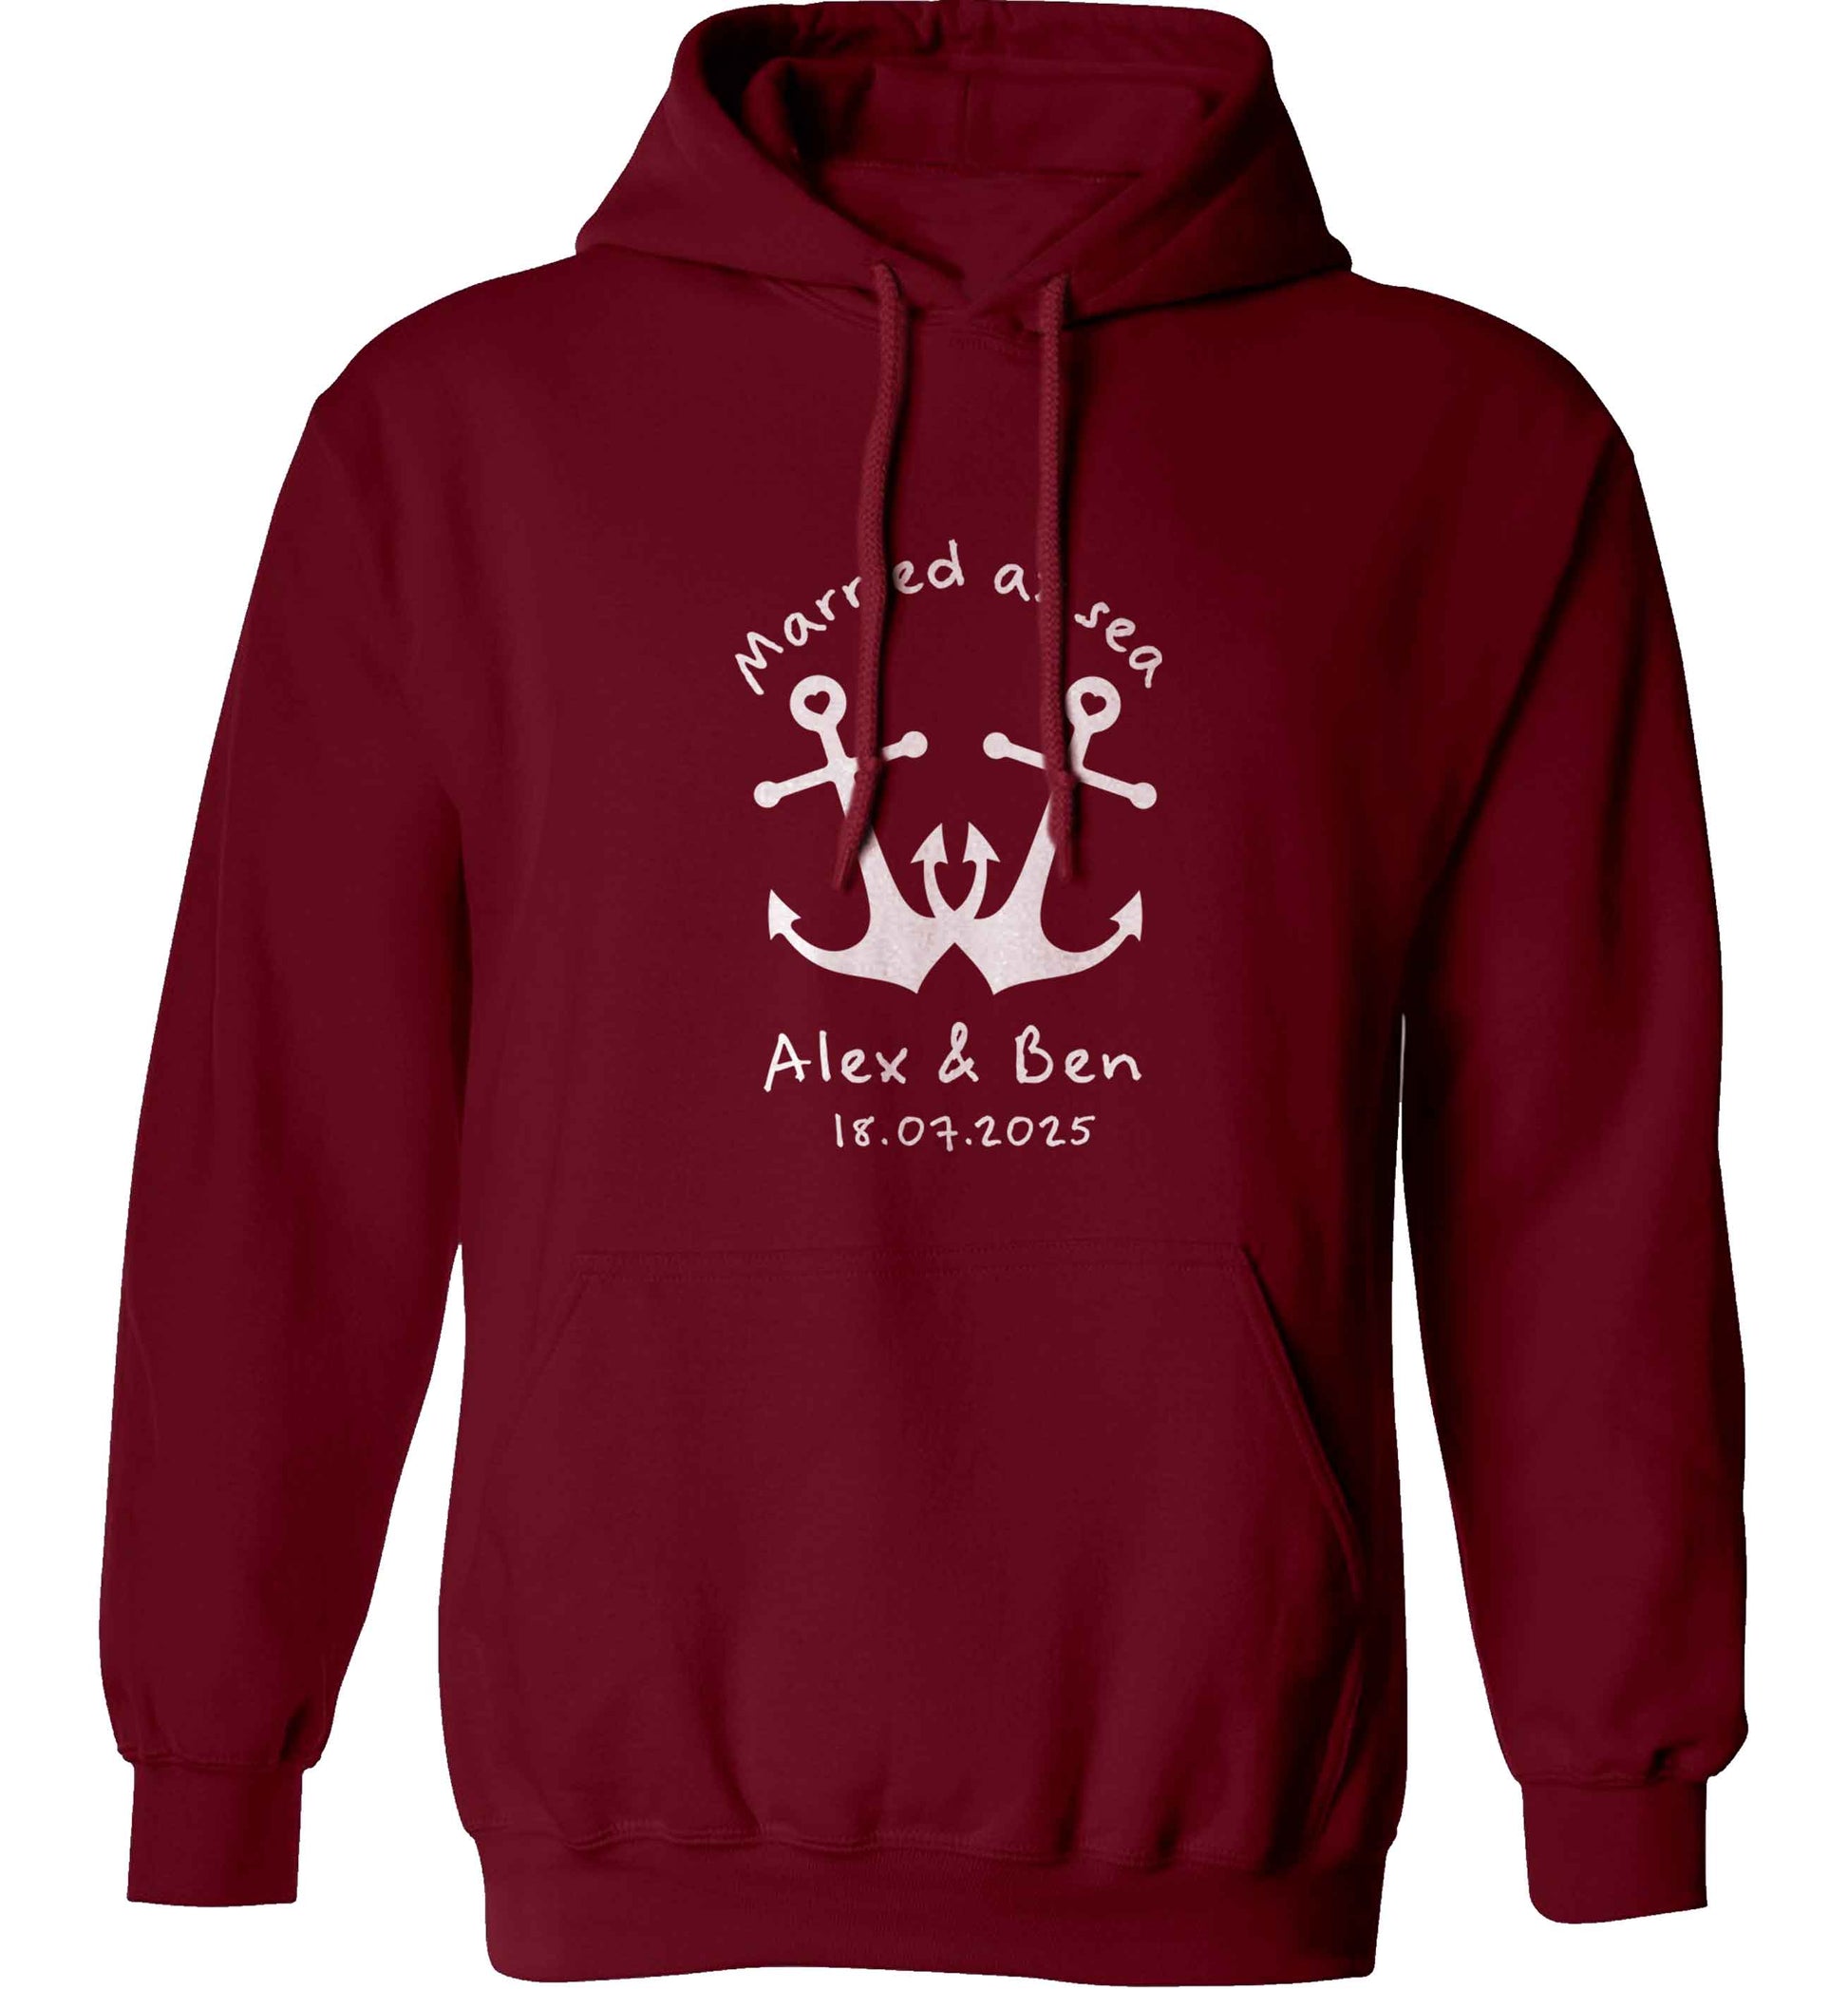 Married at sea blue anchors adults unisex maroon hoodie 2XL